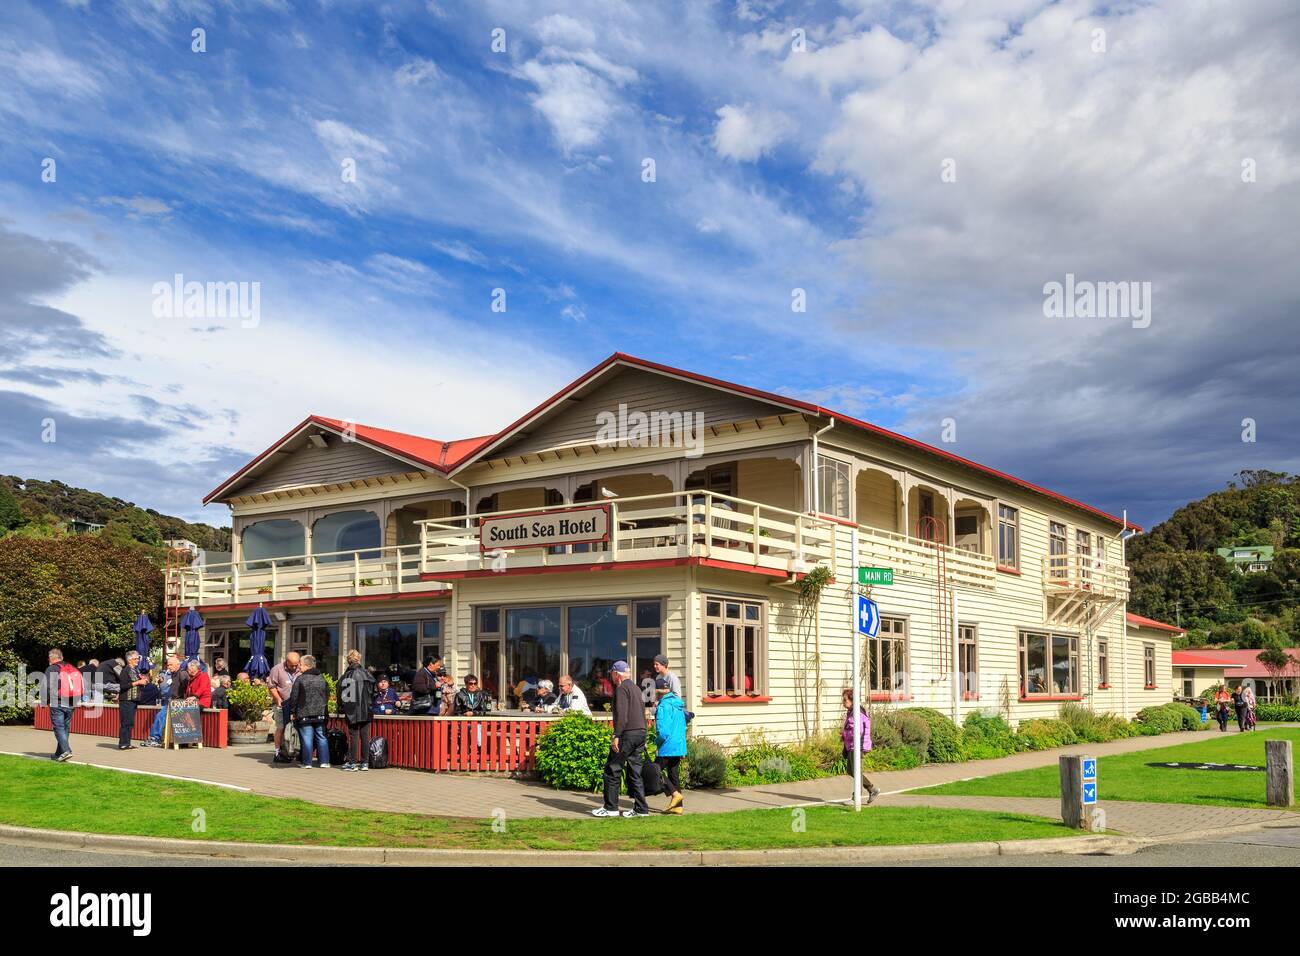 The South Sea Hotel in the town of Oban, Stewart Island, New Zealand Stock Photo